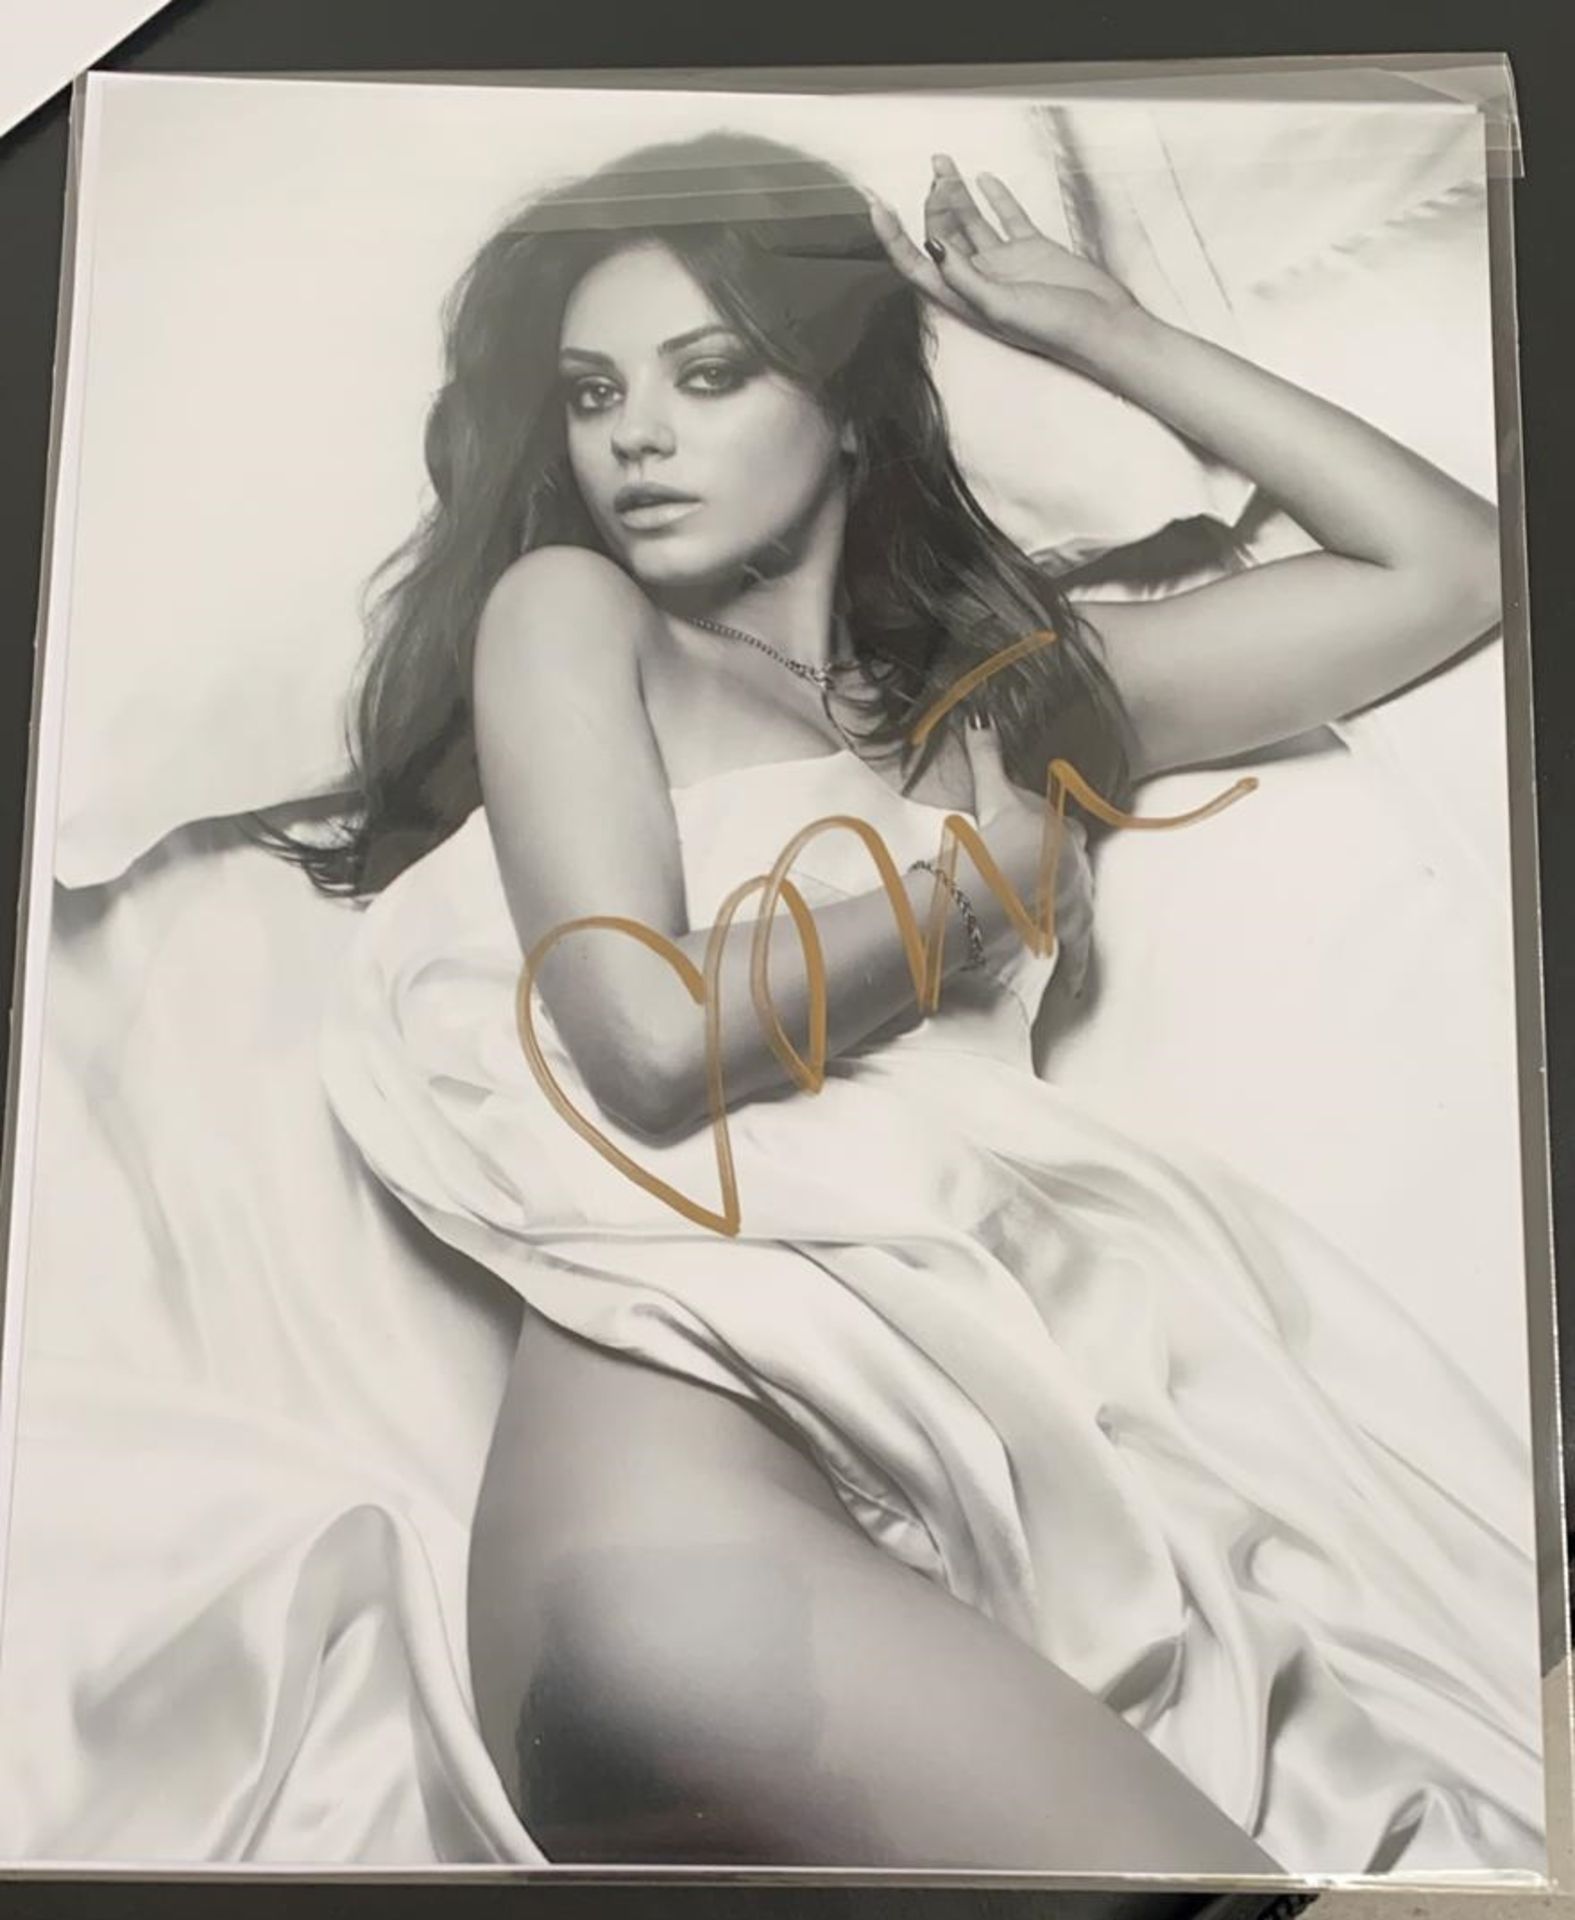 1 x Signed Autograph Picture - MILA KUNIS - With COA - Size 12 x 8 Inch - CL590 - Image 2 of 3